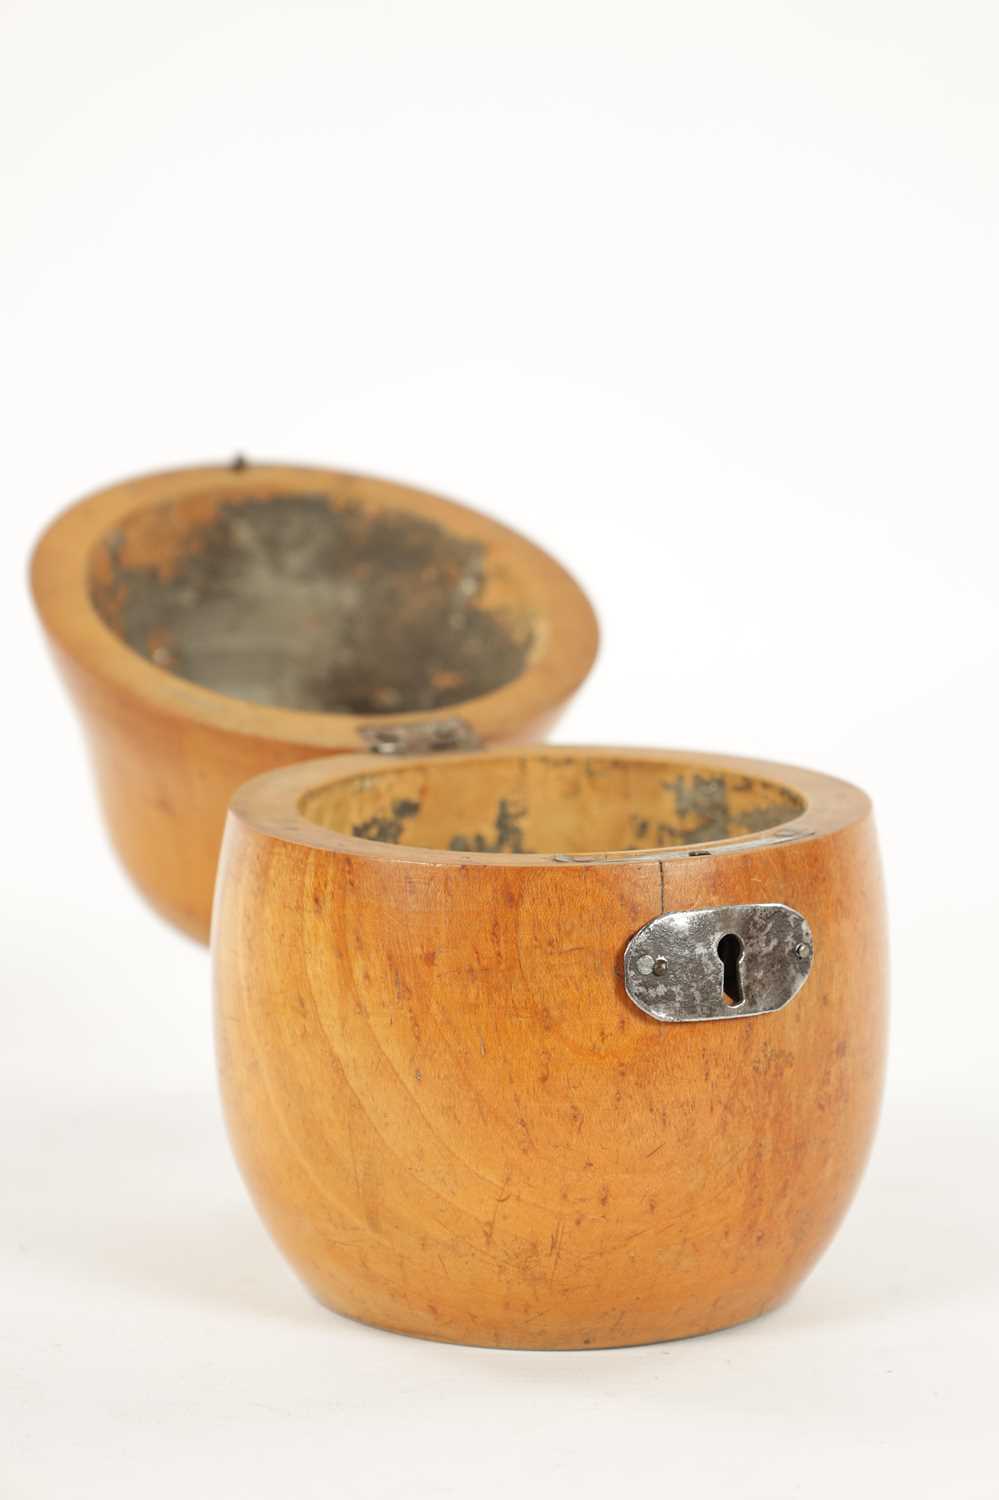 A GEORGE III FRUIT WOOD TEA CADDY OF LARGE SIZE FORMED AS A PEAR - Image 5 of 8